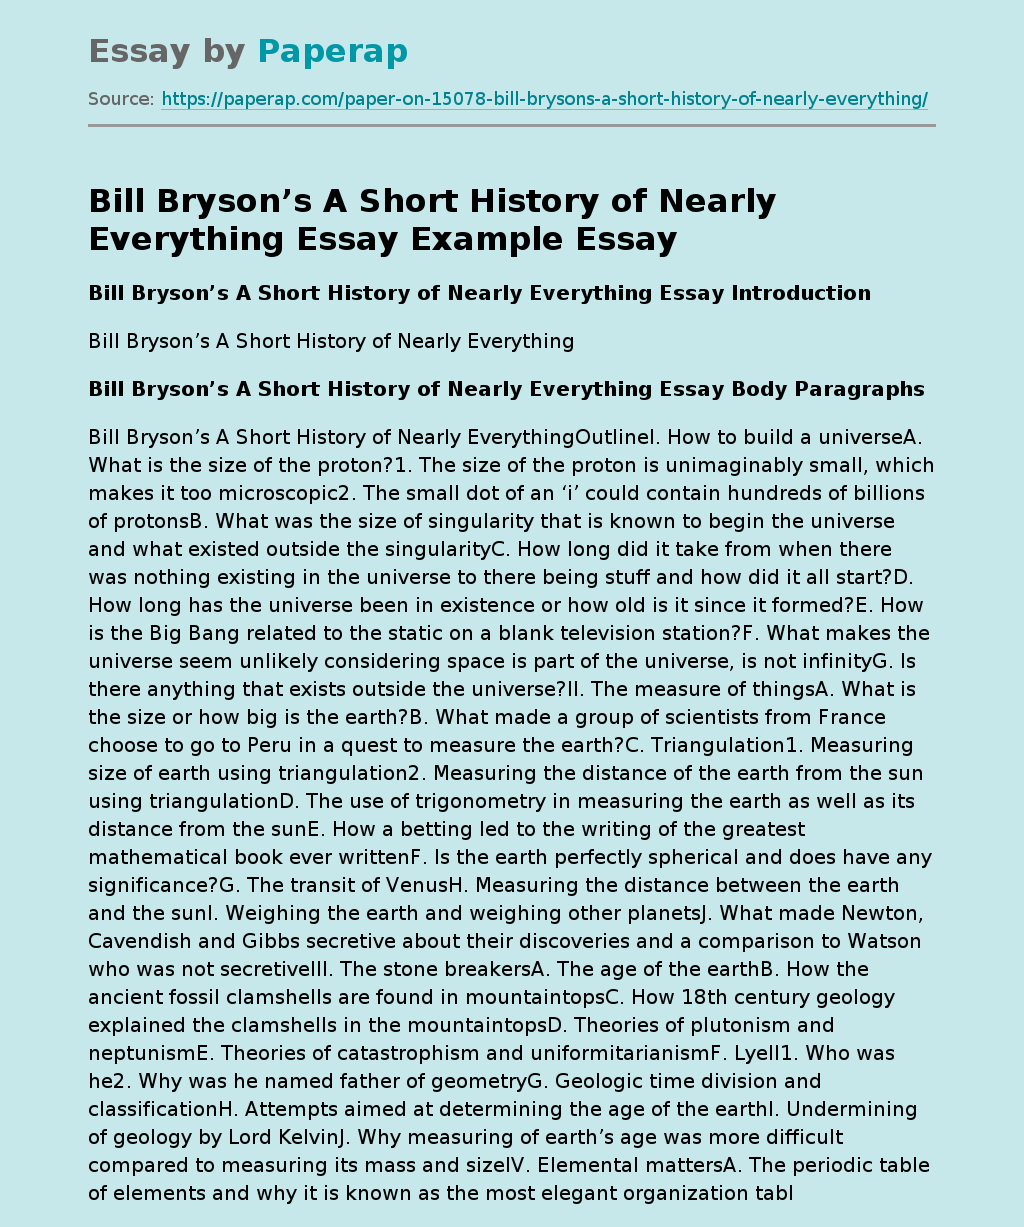 Bill Bryson’s A Short History of Nearly Everything Essay Example